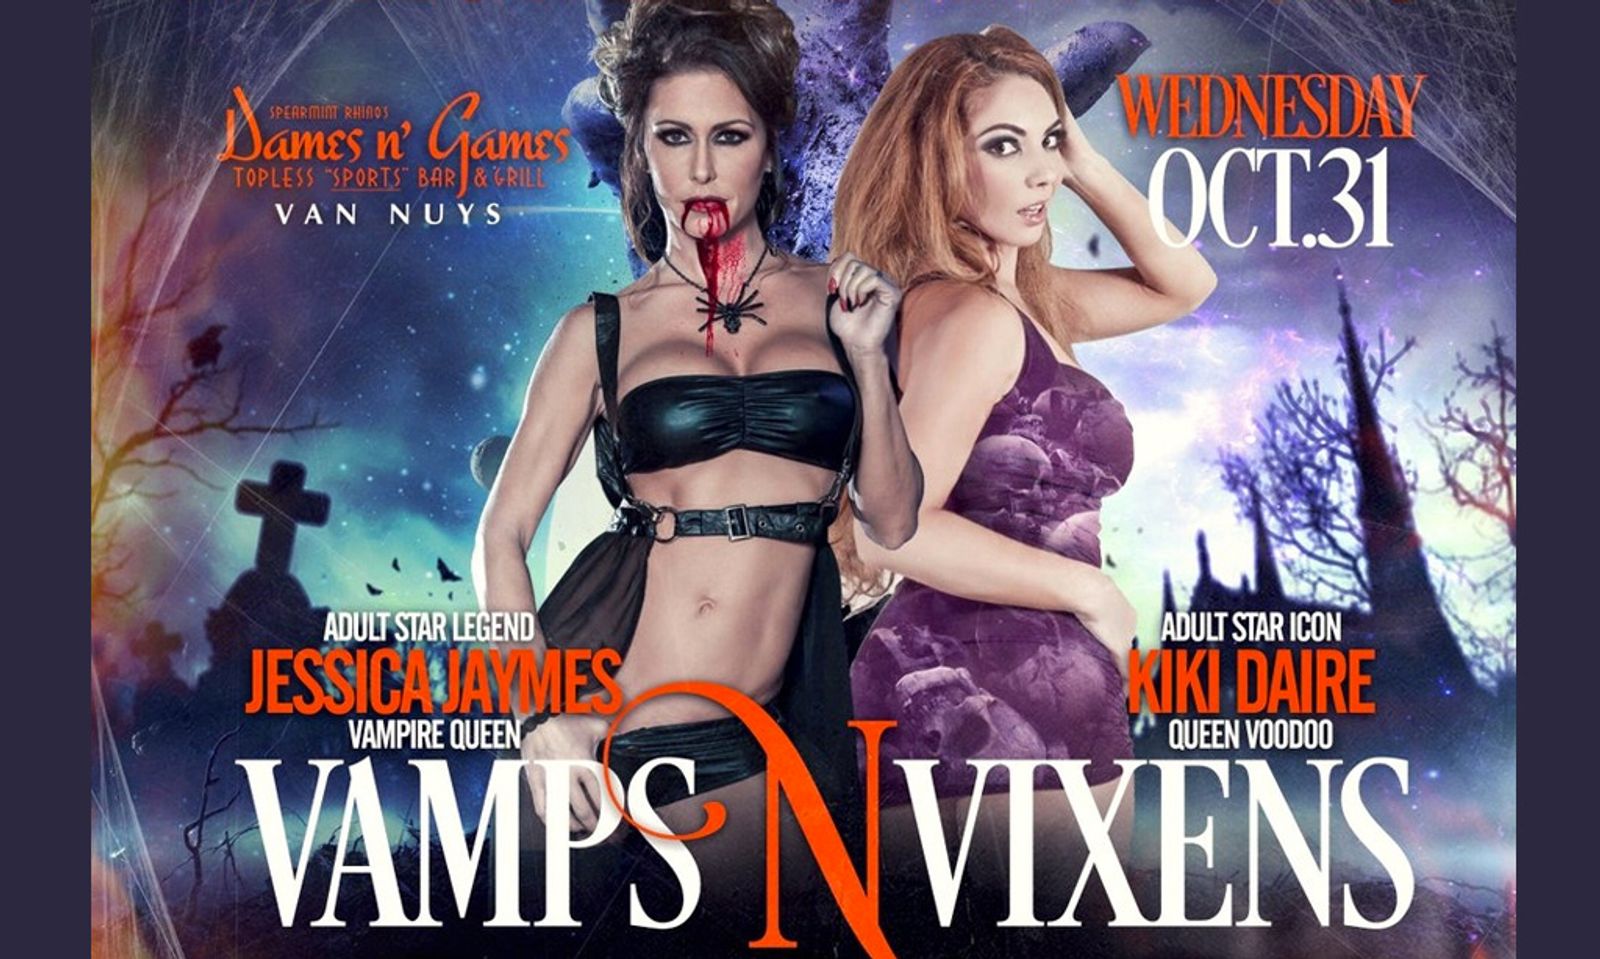 Kiki Daire & Jessica Jaymes Host Vamps N’ Vixens Party